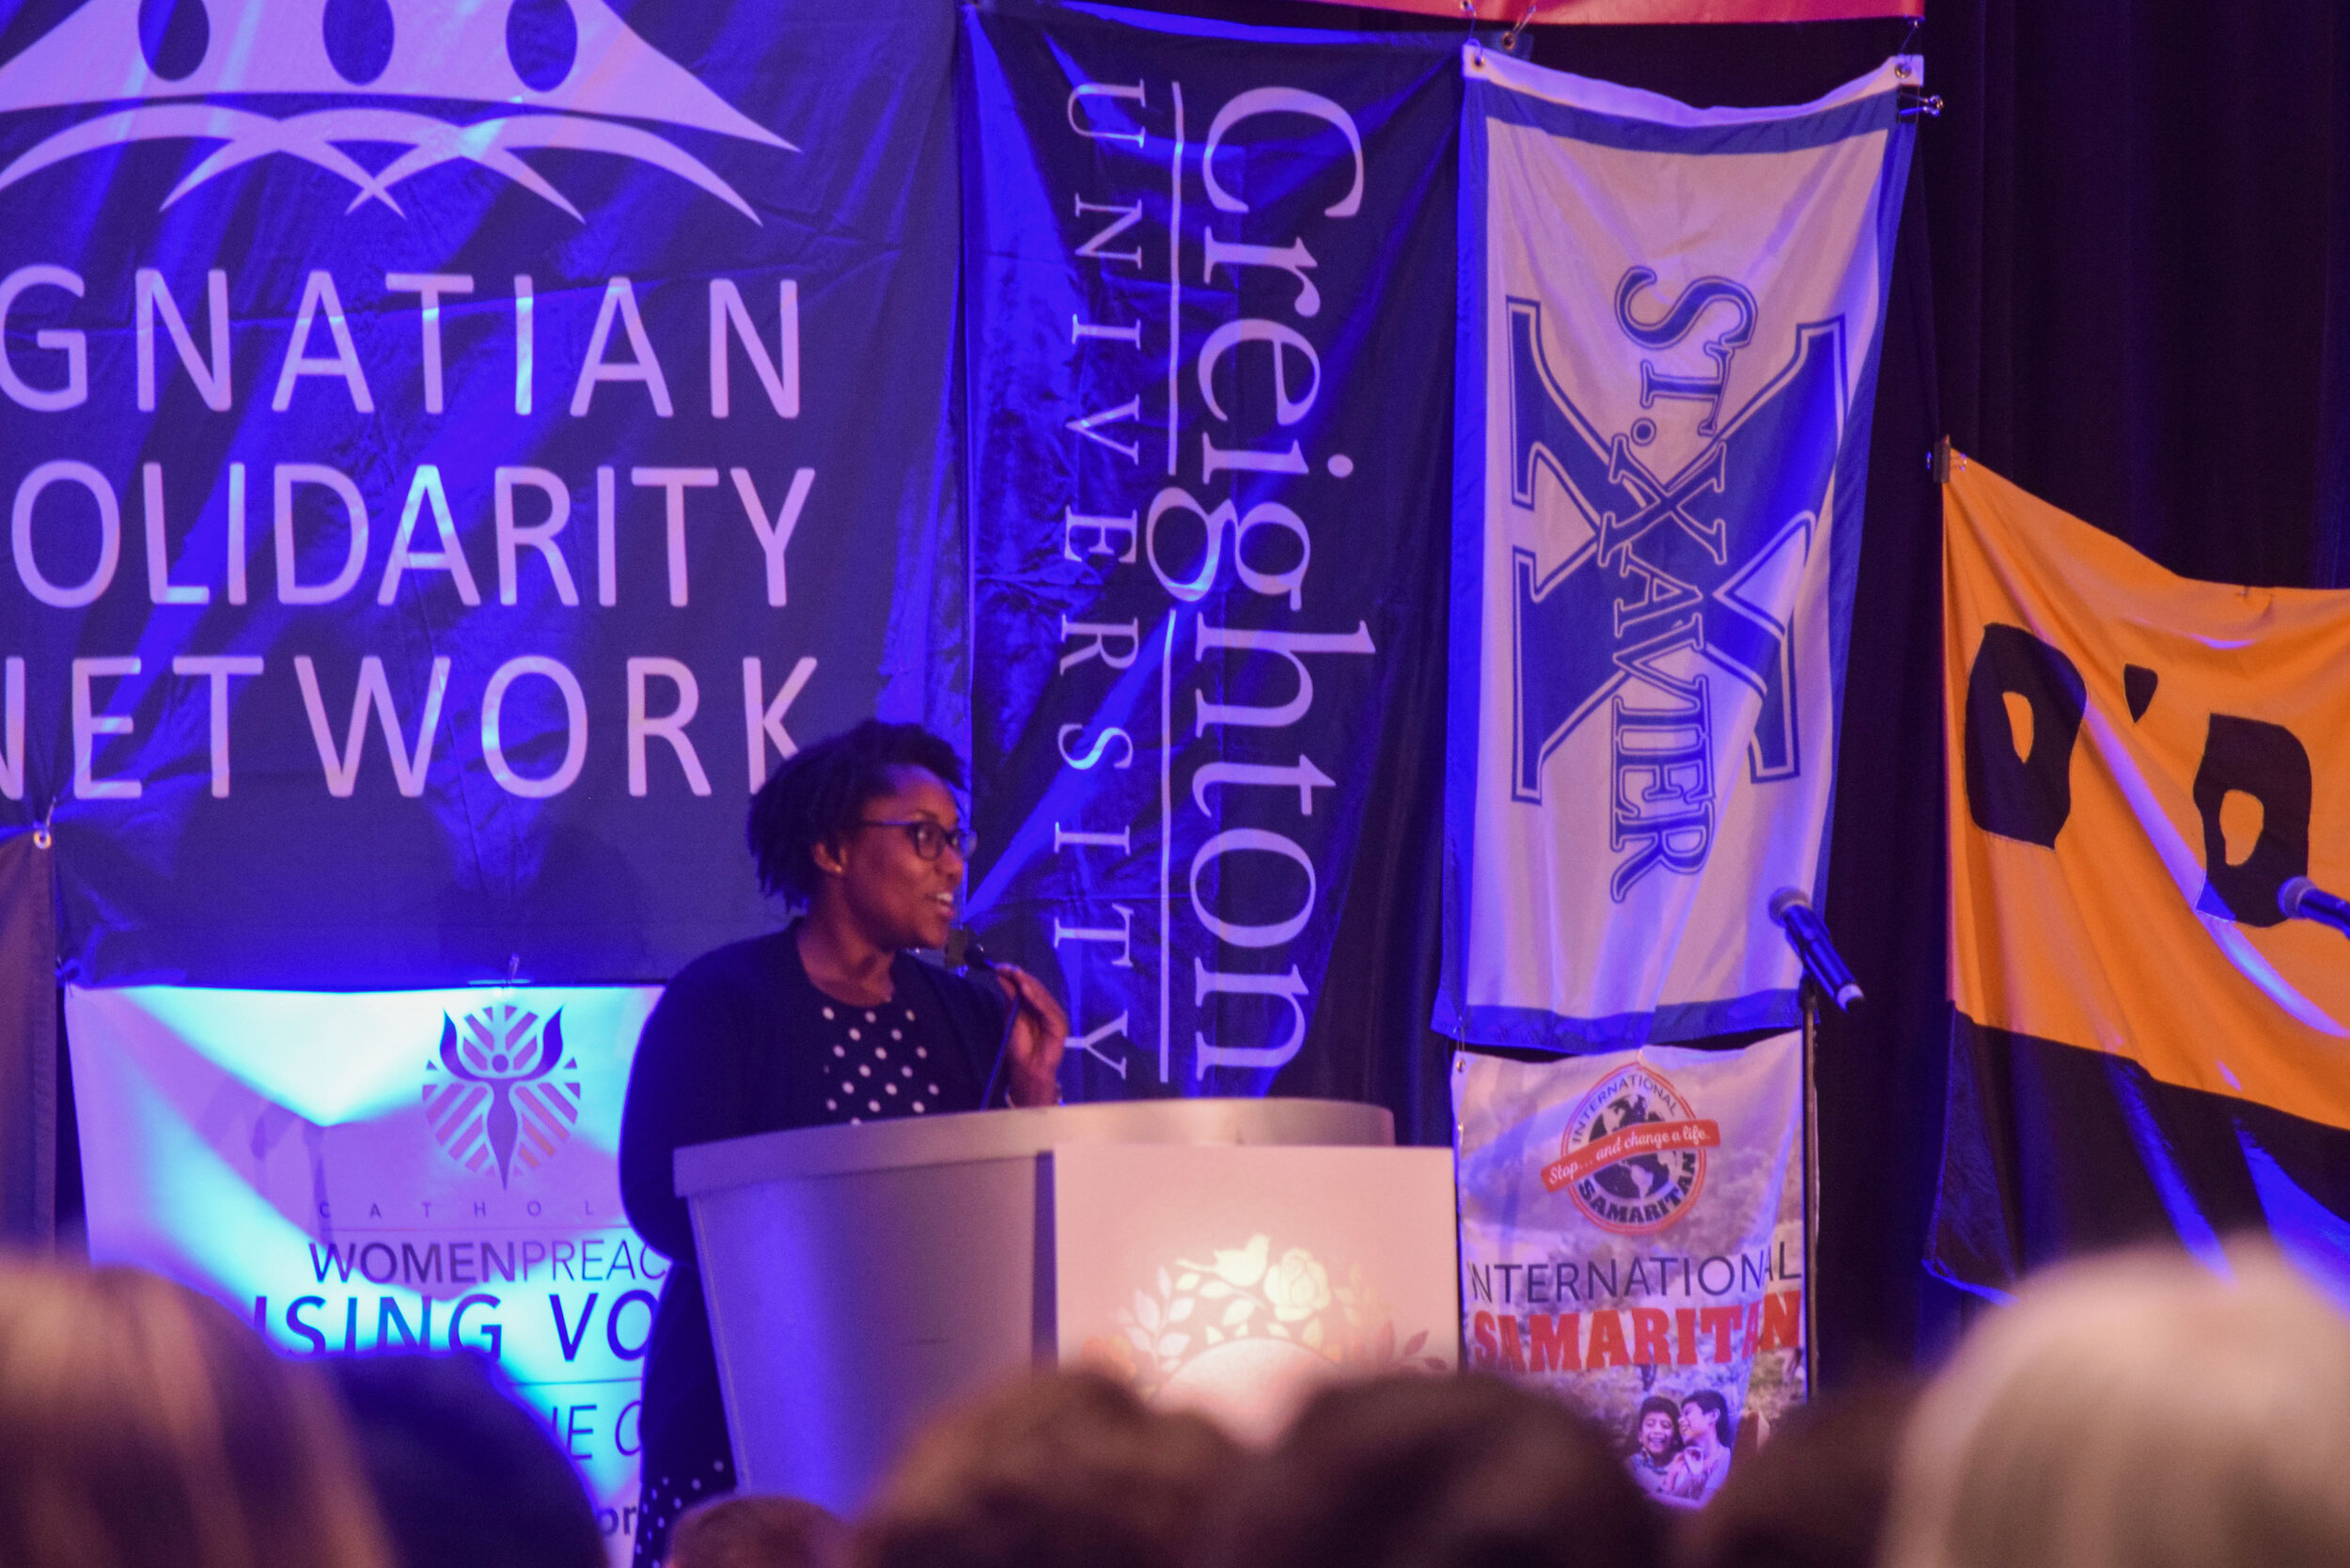  Marcia Chatelain, an associate professor at Georgetown University in Washington, addresses the audience at the 2019 Ignatian Family Teach-In for Justice in Washington, D.C. Chatelain is currently working on the book “Franchise: The Golden Arches in 